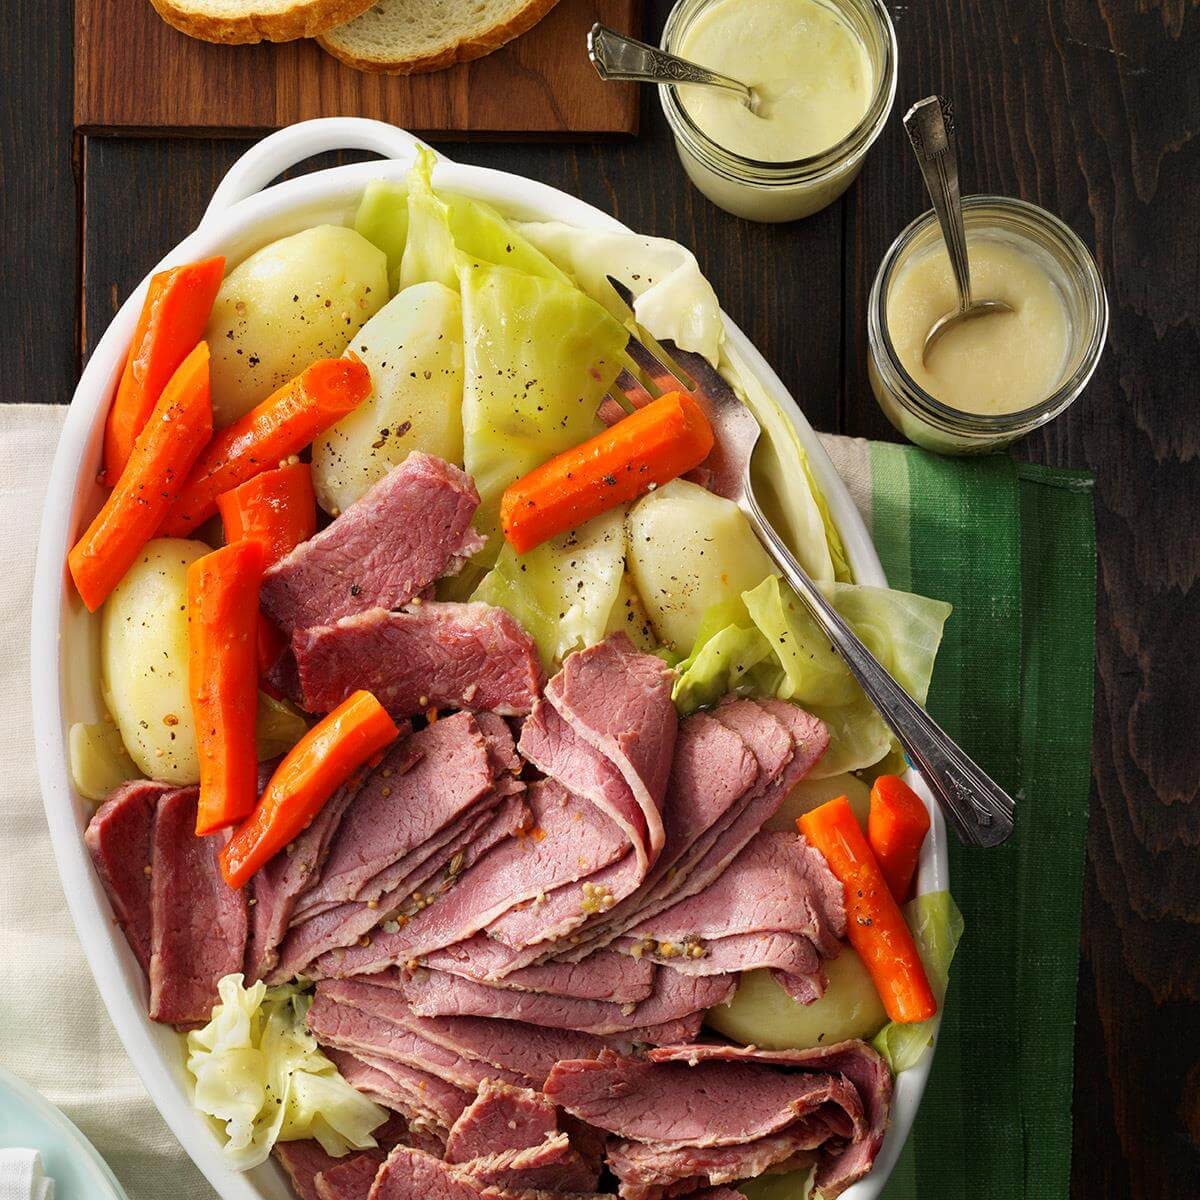 22 Corned Beef and Cabbage Recipes to Make All Year | Taste of Home